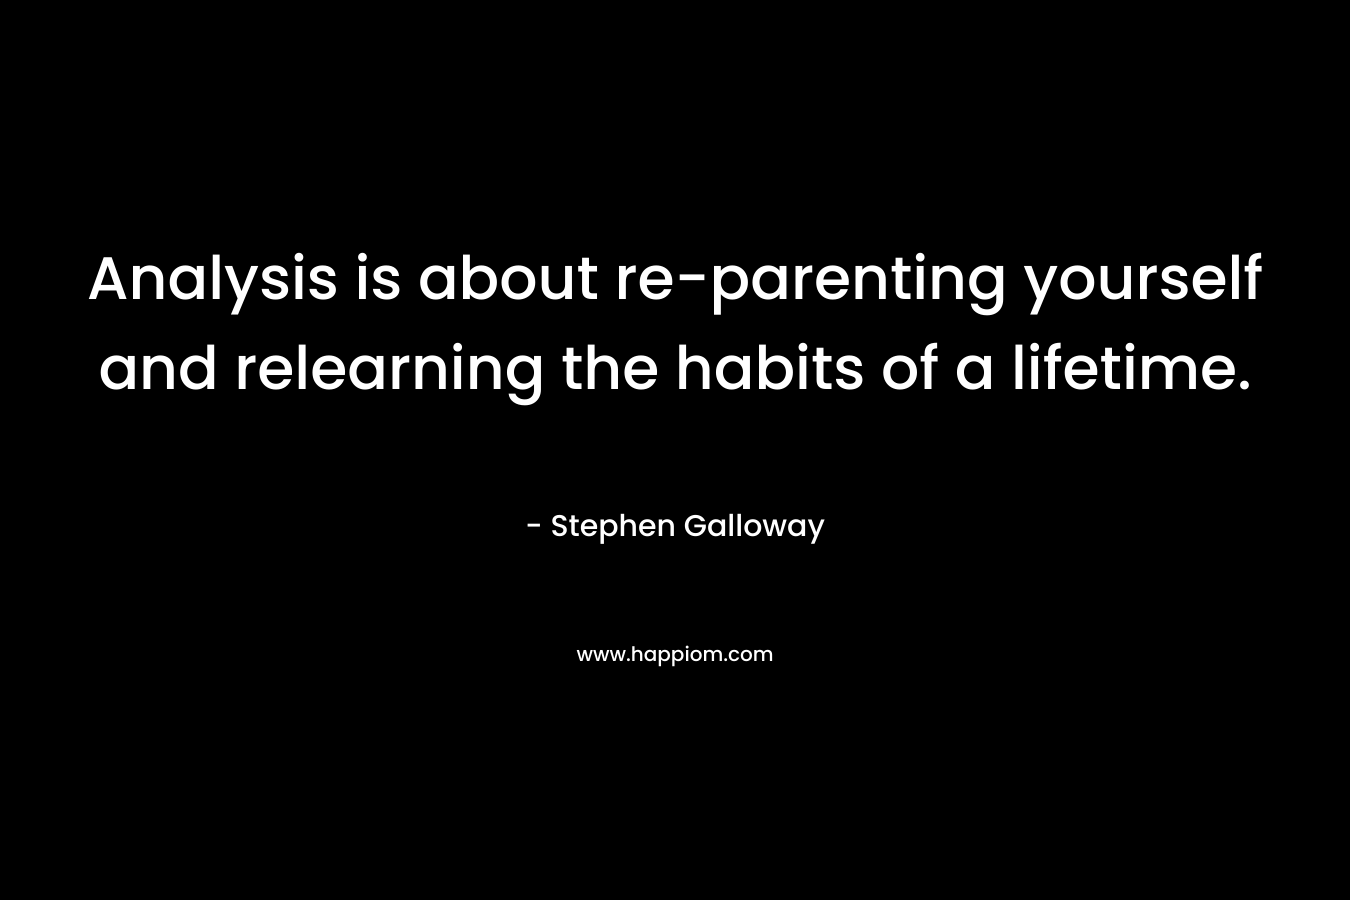 Analysis is about re-parenting yourself and relearning the habits of a lifetime. – Stephen Galloway